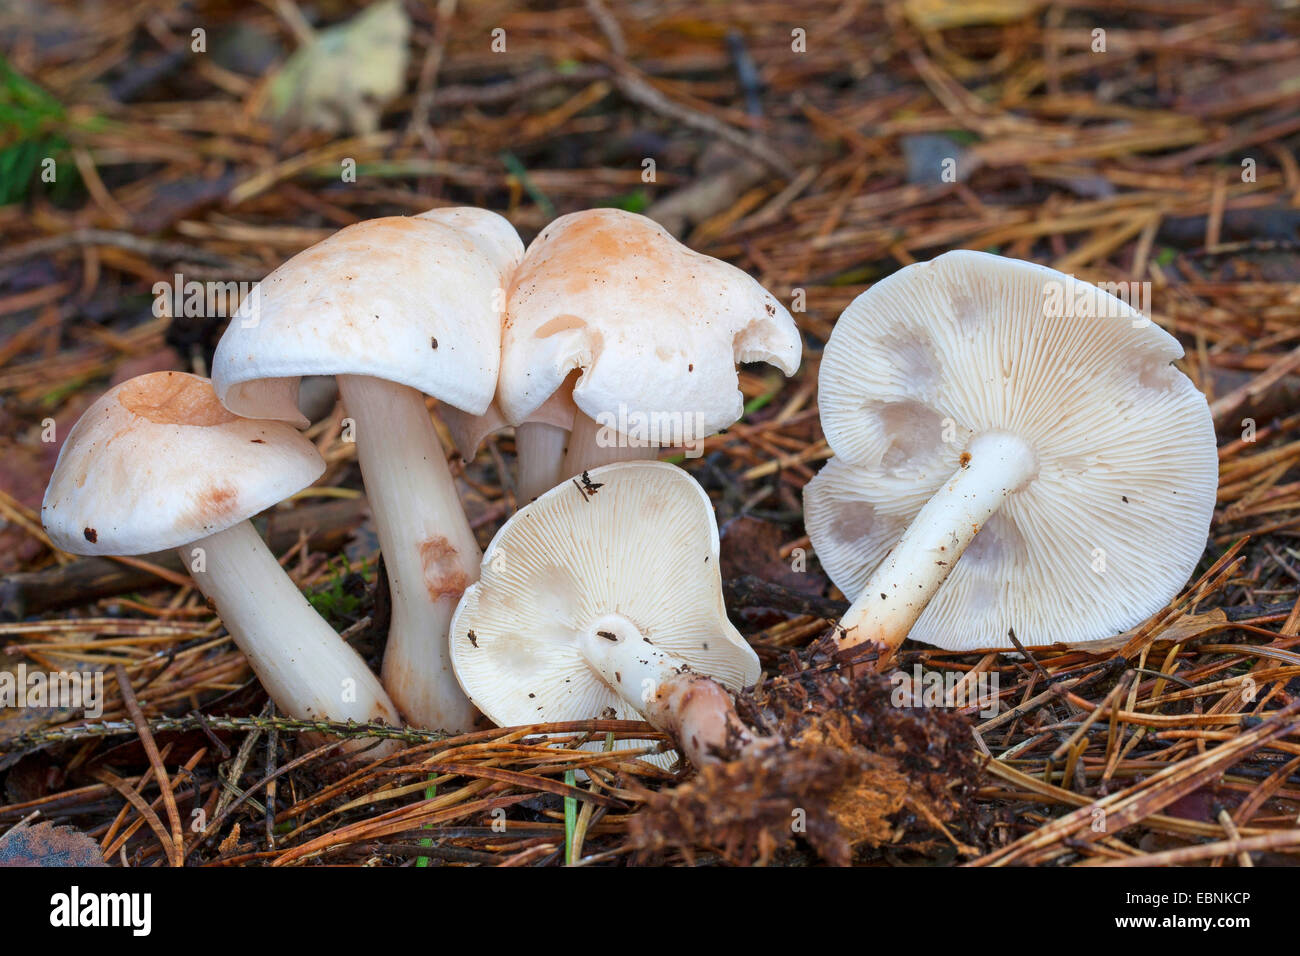 Spotted toughshank, Spotted Toughshank mushroom, Spotted coincap (Collybia maculata, Rhodocollybia maculata), five fruiting bodies on forest floor, Germany Stock Photo